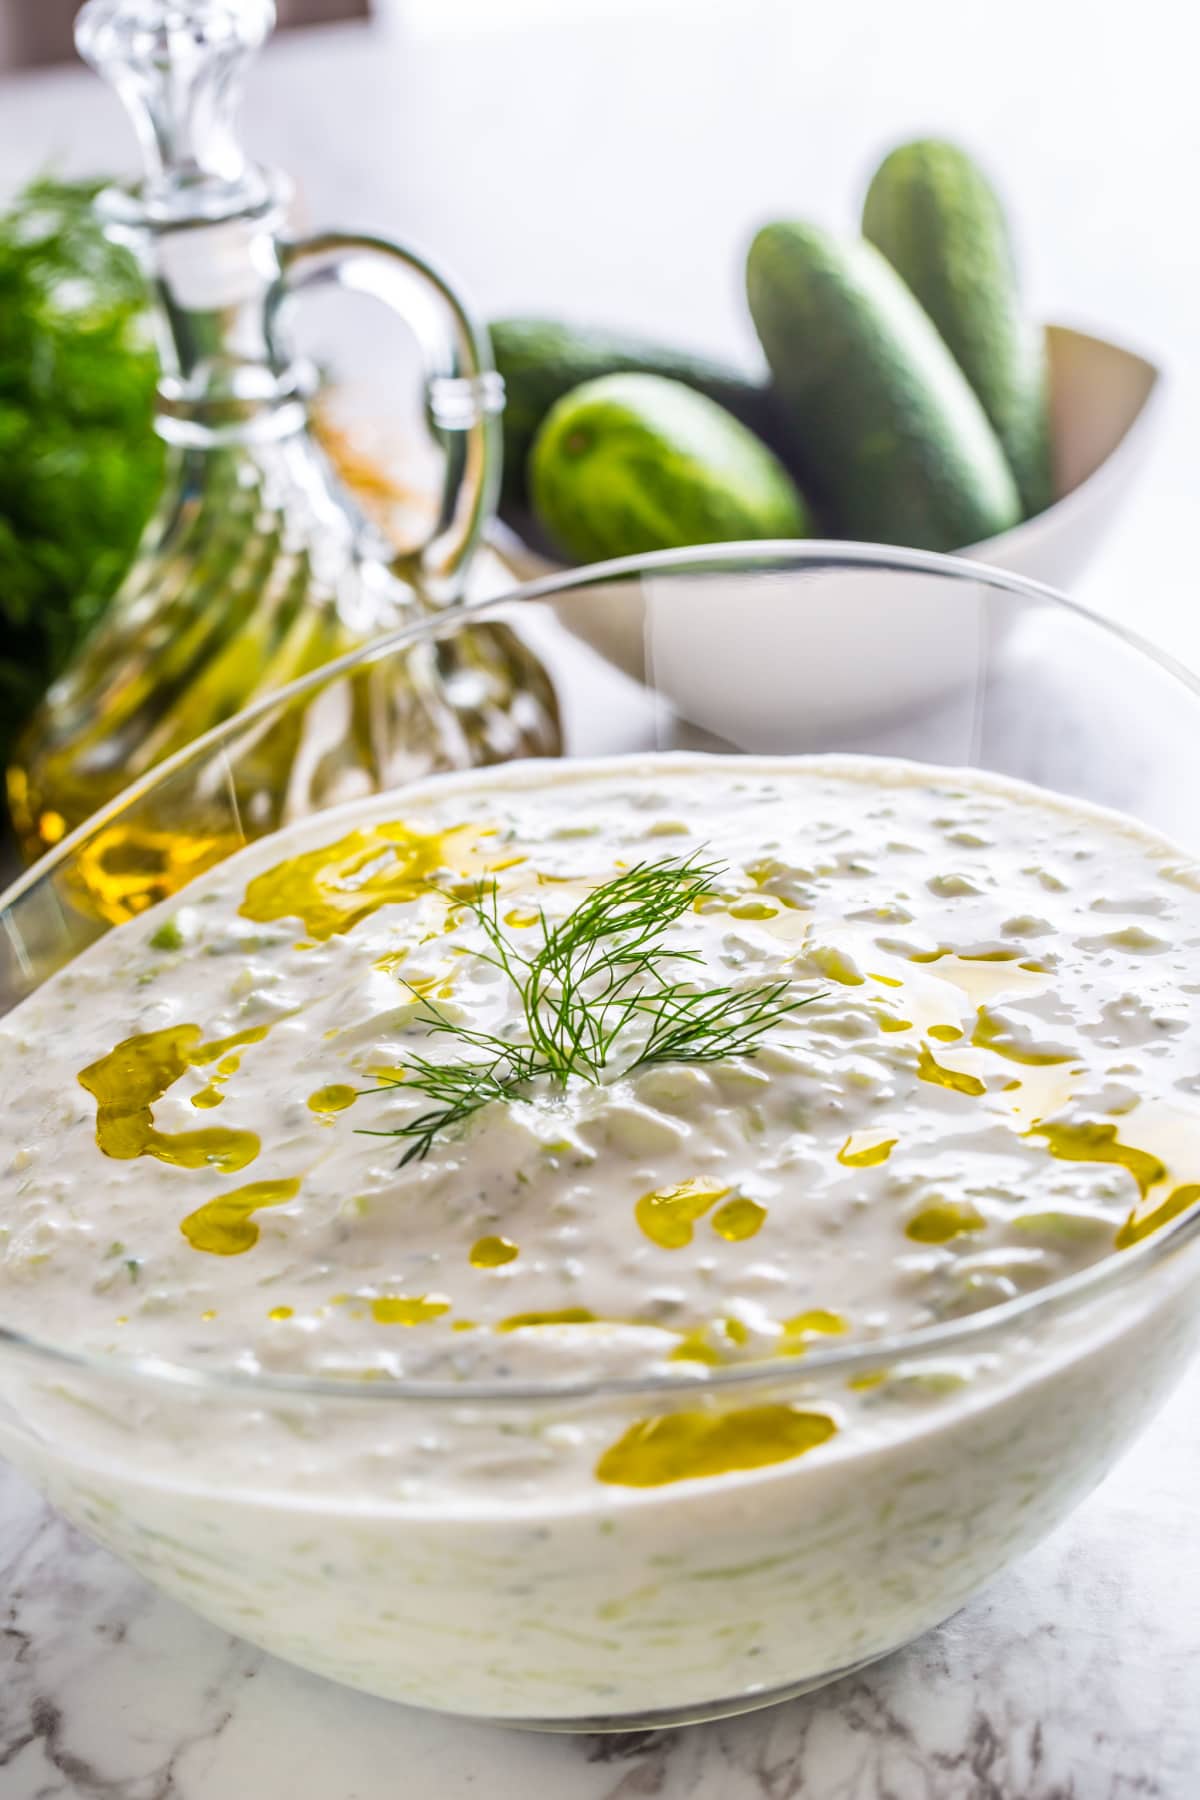 Tzatziki sauce in a glass bowl with a drizzle of olive oil.